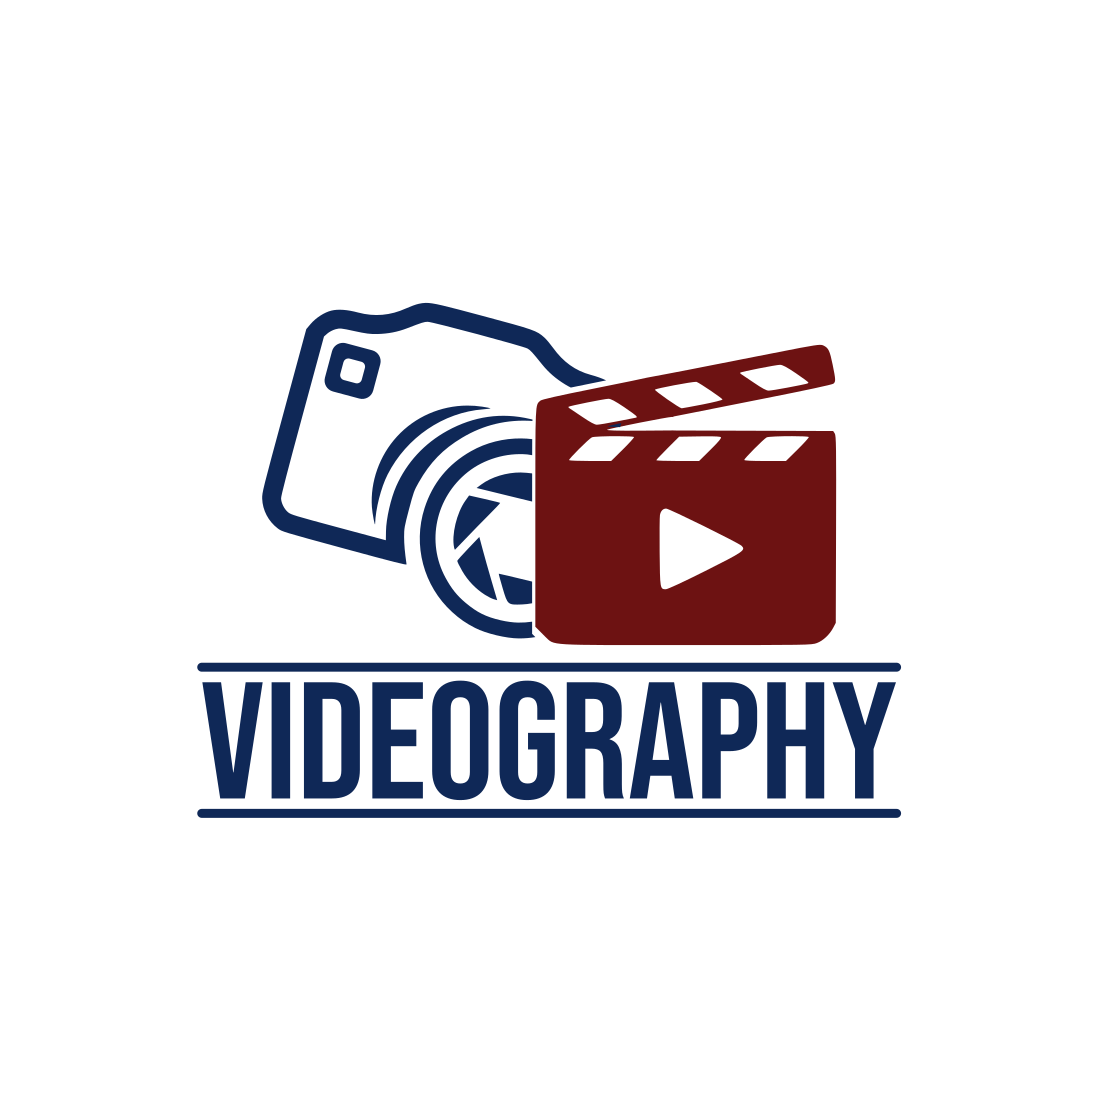 Videography Logo Template With Camera Icon cover image.